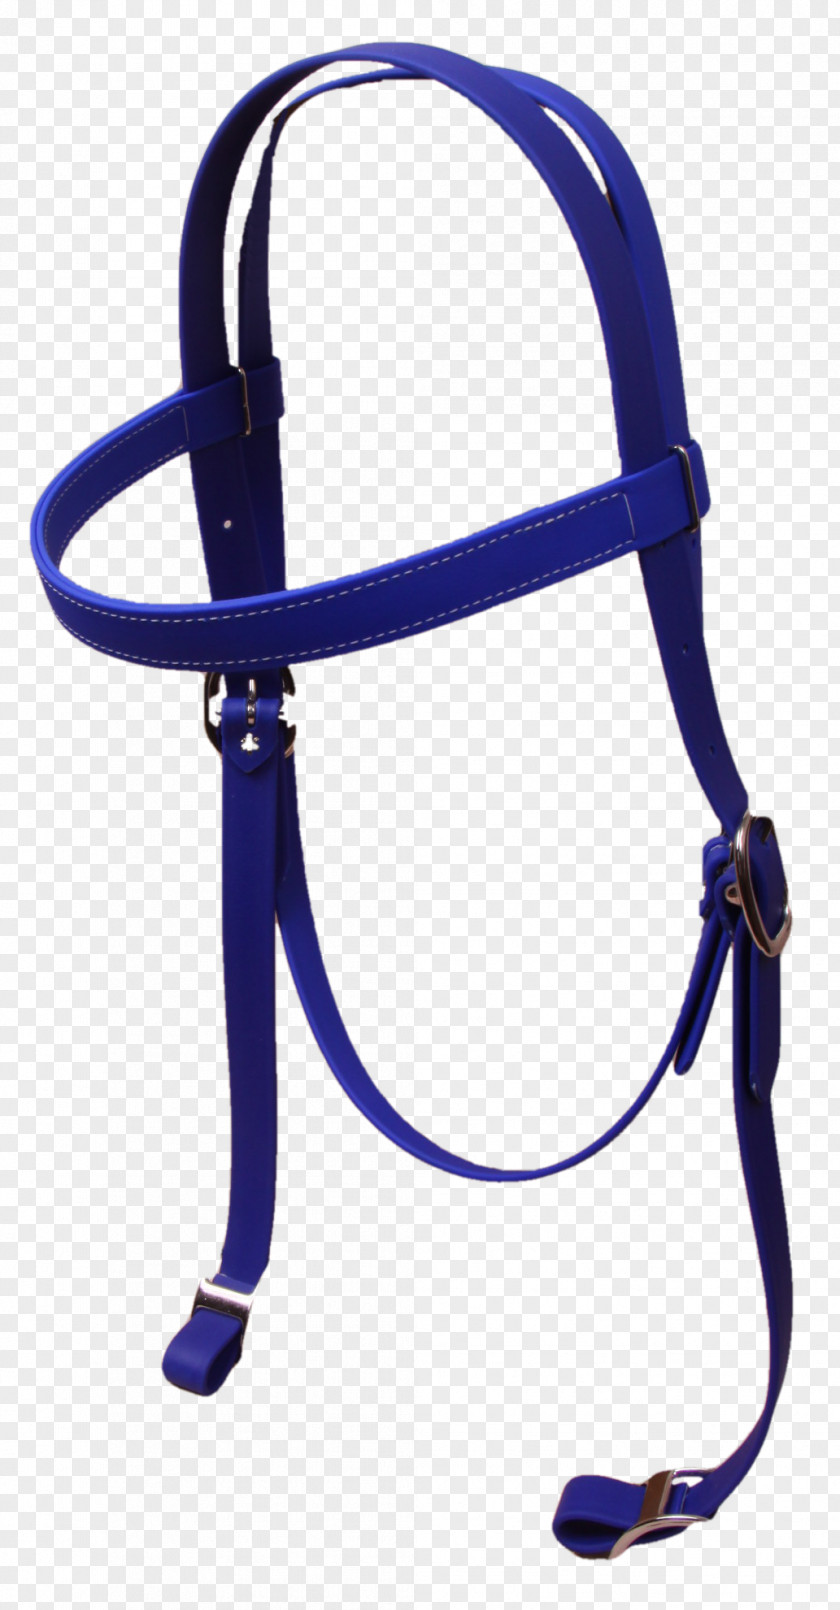 ROYAL HORSE Climbing Harnesses Clothing Accessories Safety Harness Fashion PNG